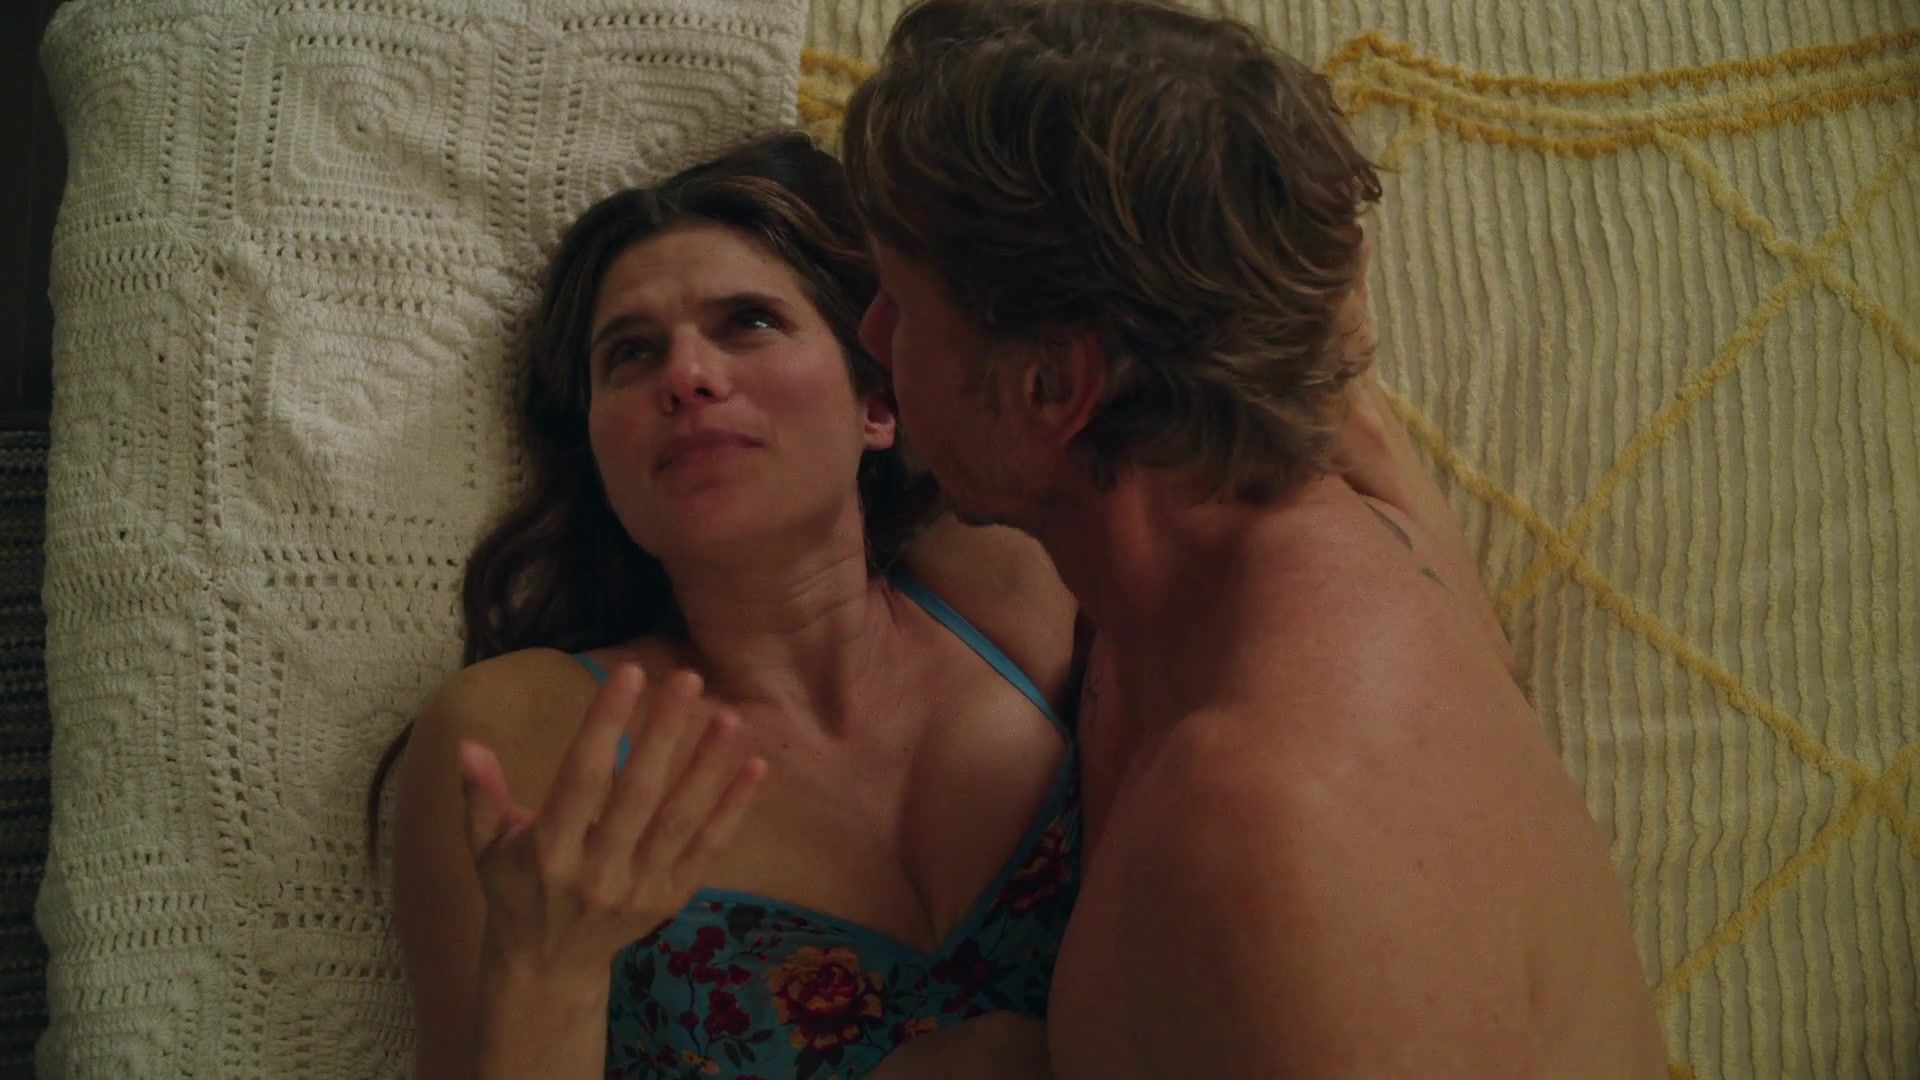 Behind Nude Lake Bell - Bless This Mess s02e02 (2019) Gay Kissing